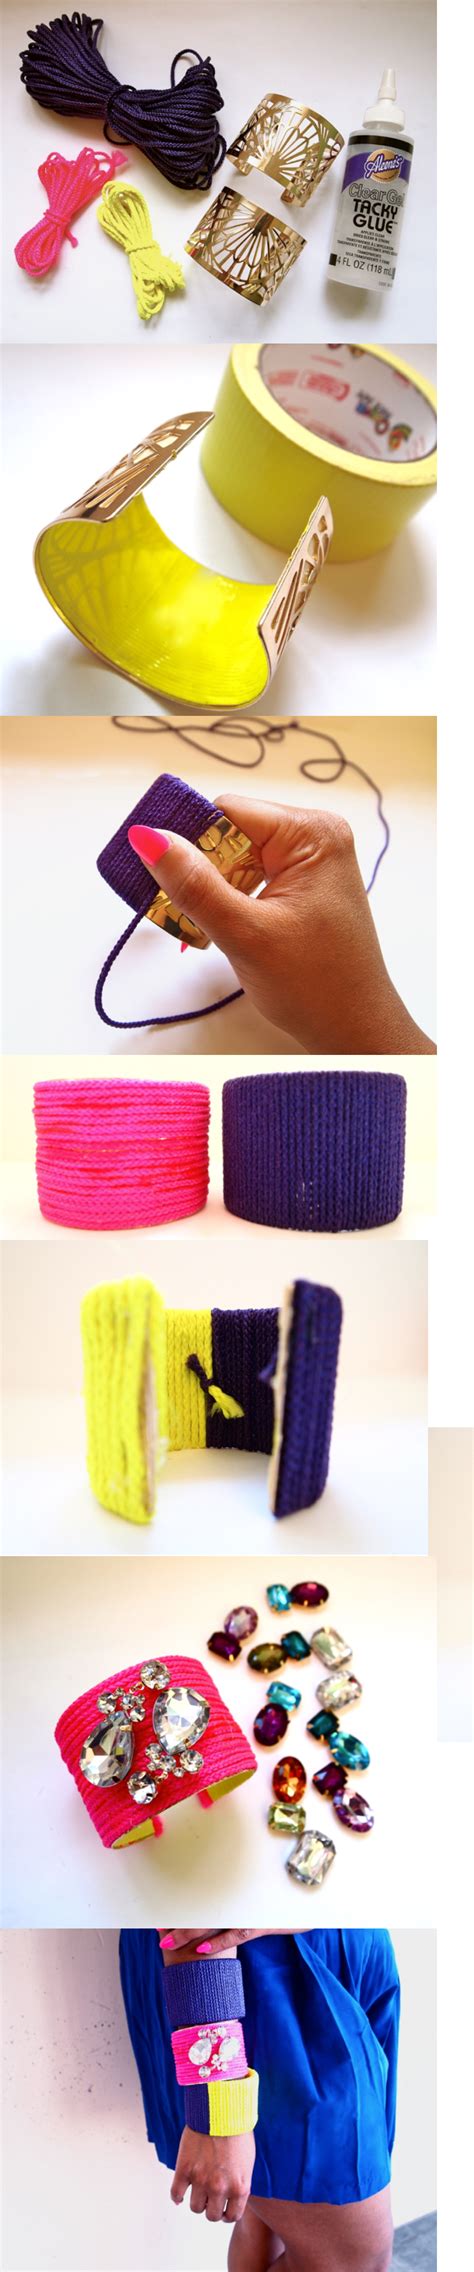 15 Diy Fashion Projects That You Have To Try